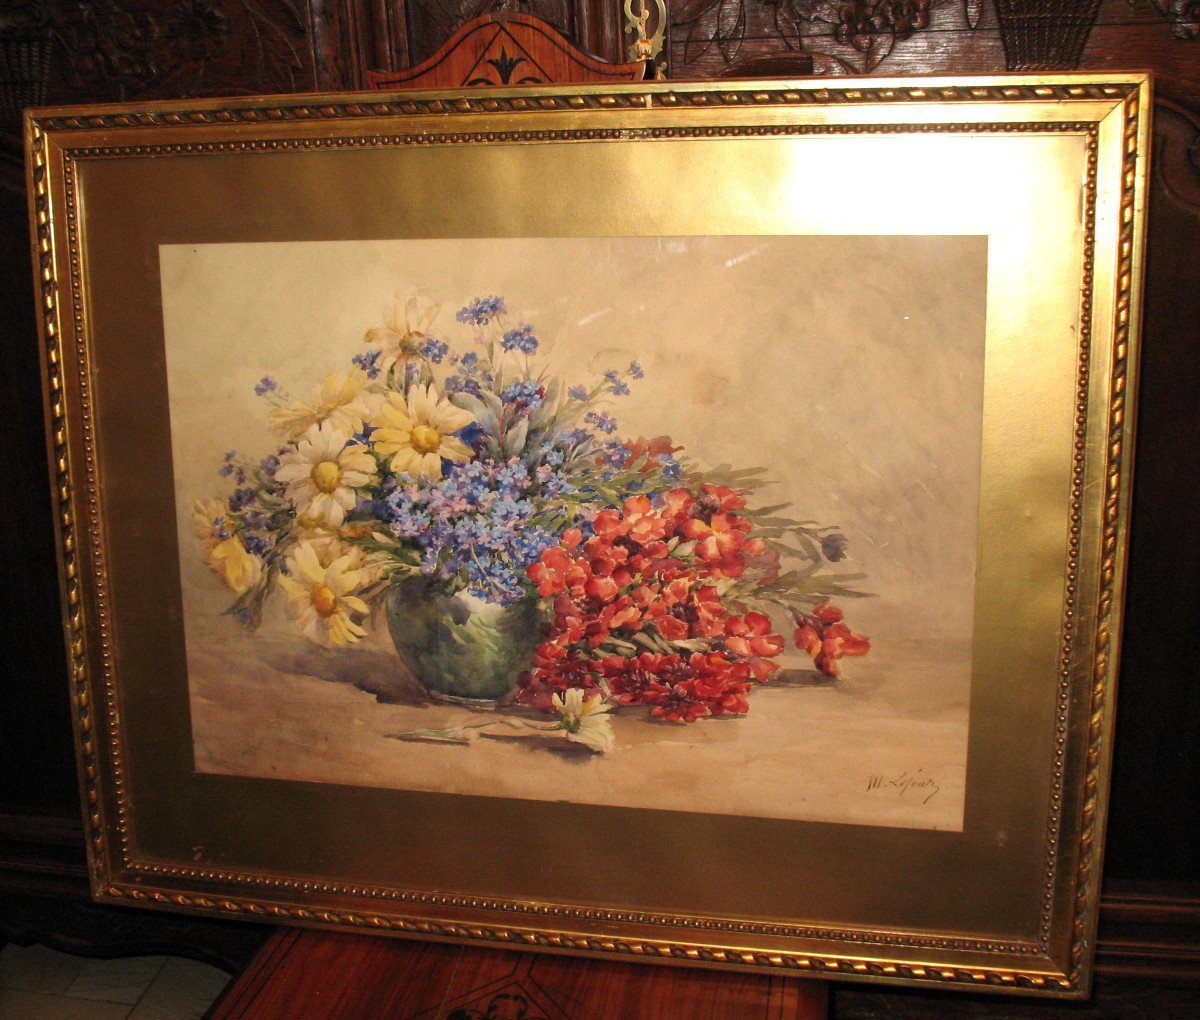 Watercolor Bouquet Of Flowers In A Vase Signed By M. Lejour, 19th Century D: 71 X 57 Cm-photo-2